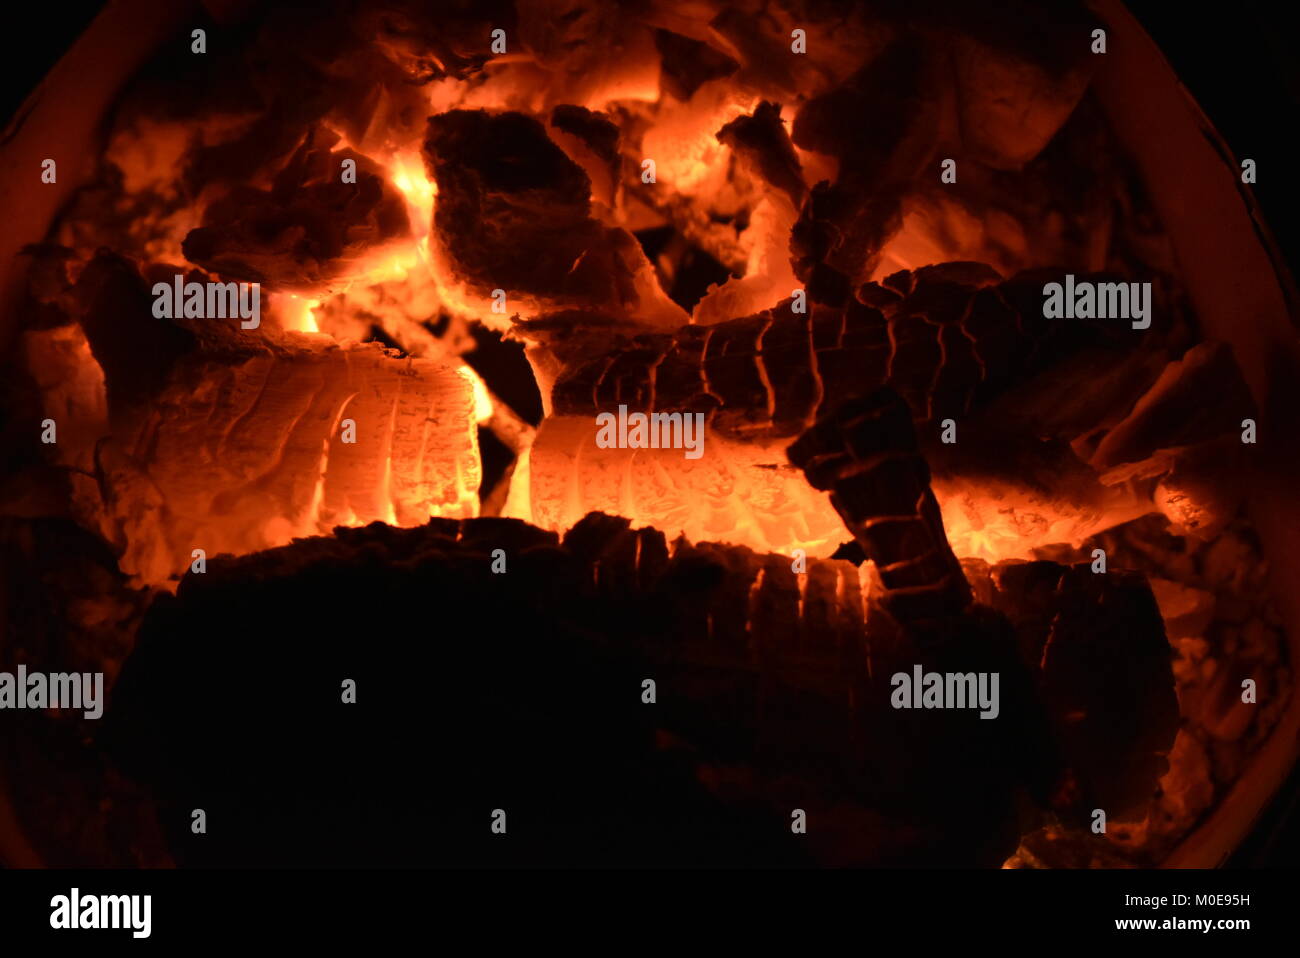 Charcoal burning on stove inside house producing beautiful texture Stock Photo